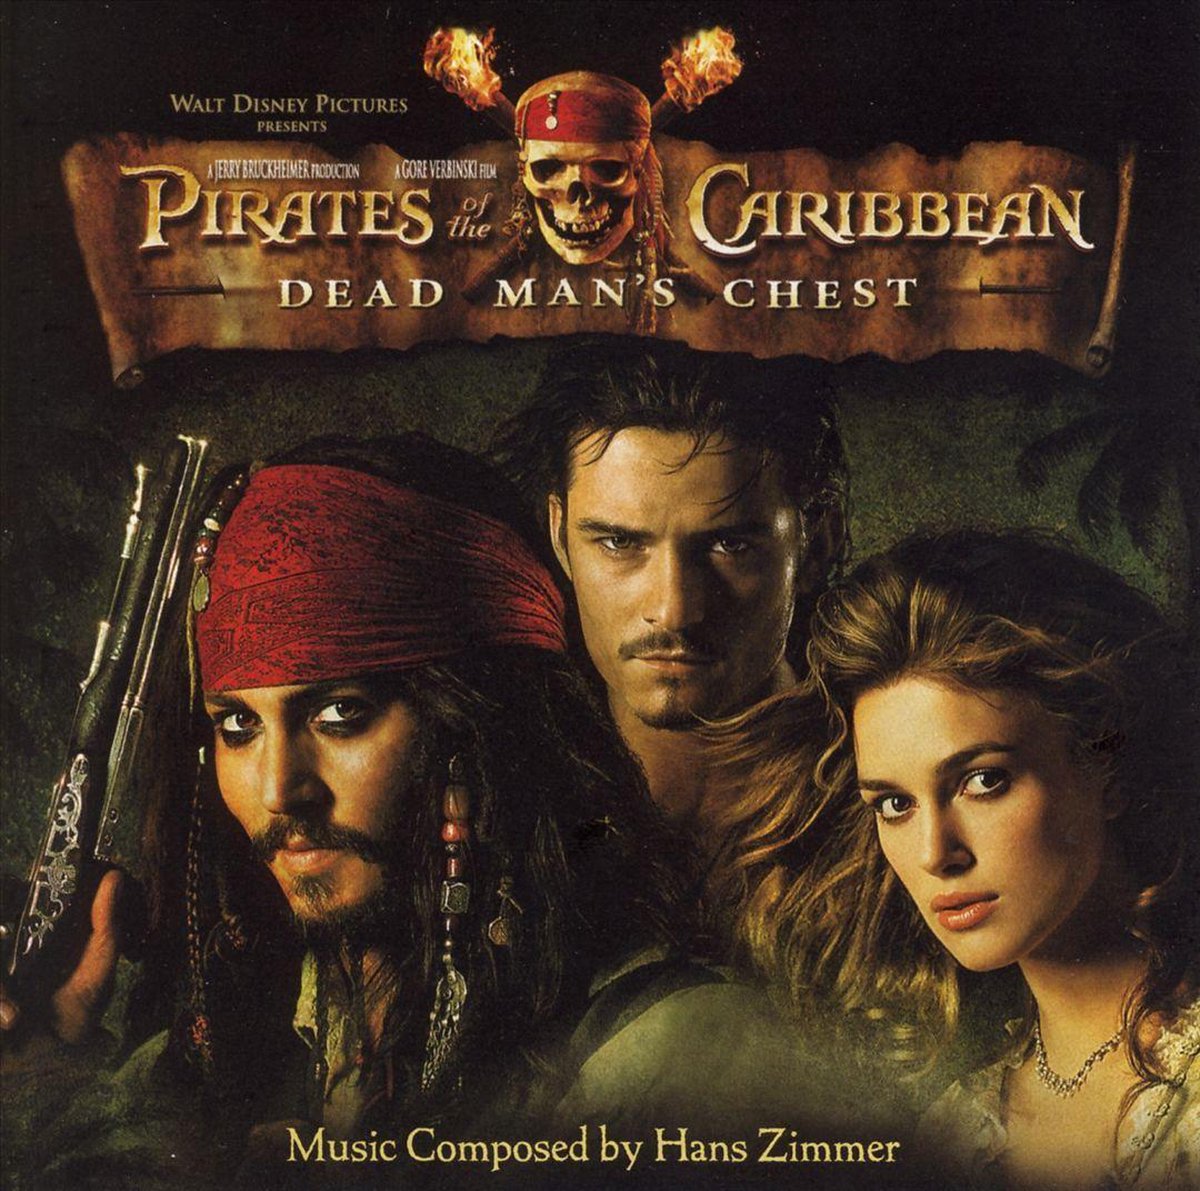 Pirates of the Caribbean: Dead Man's Chest [Original Motion Picture Soundtrack] - Hans Zimmer